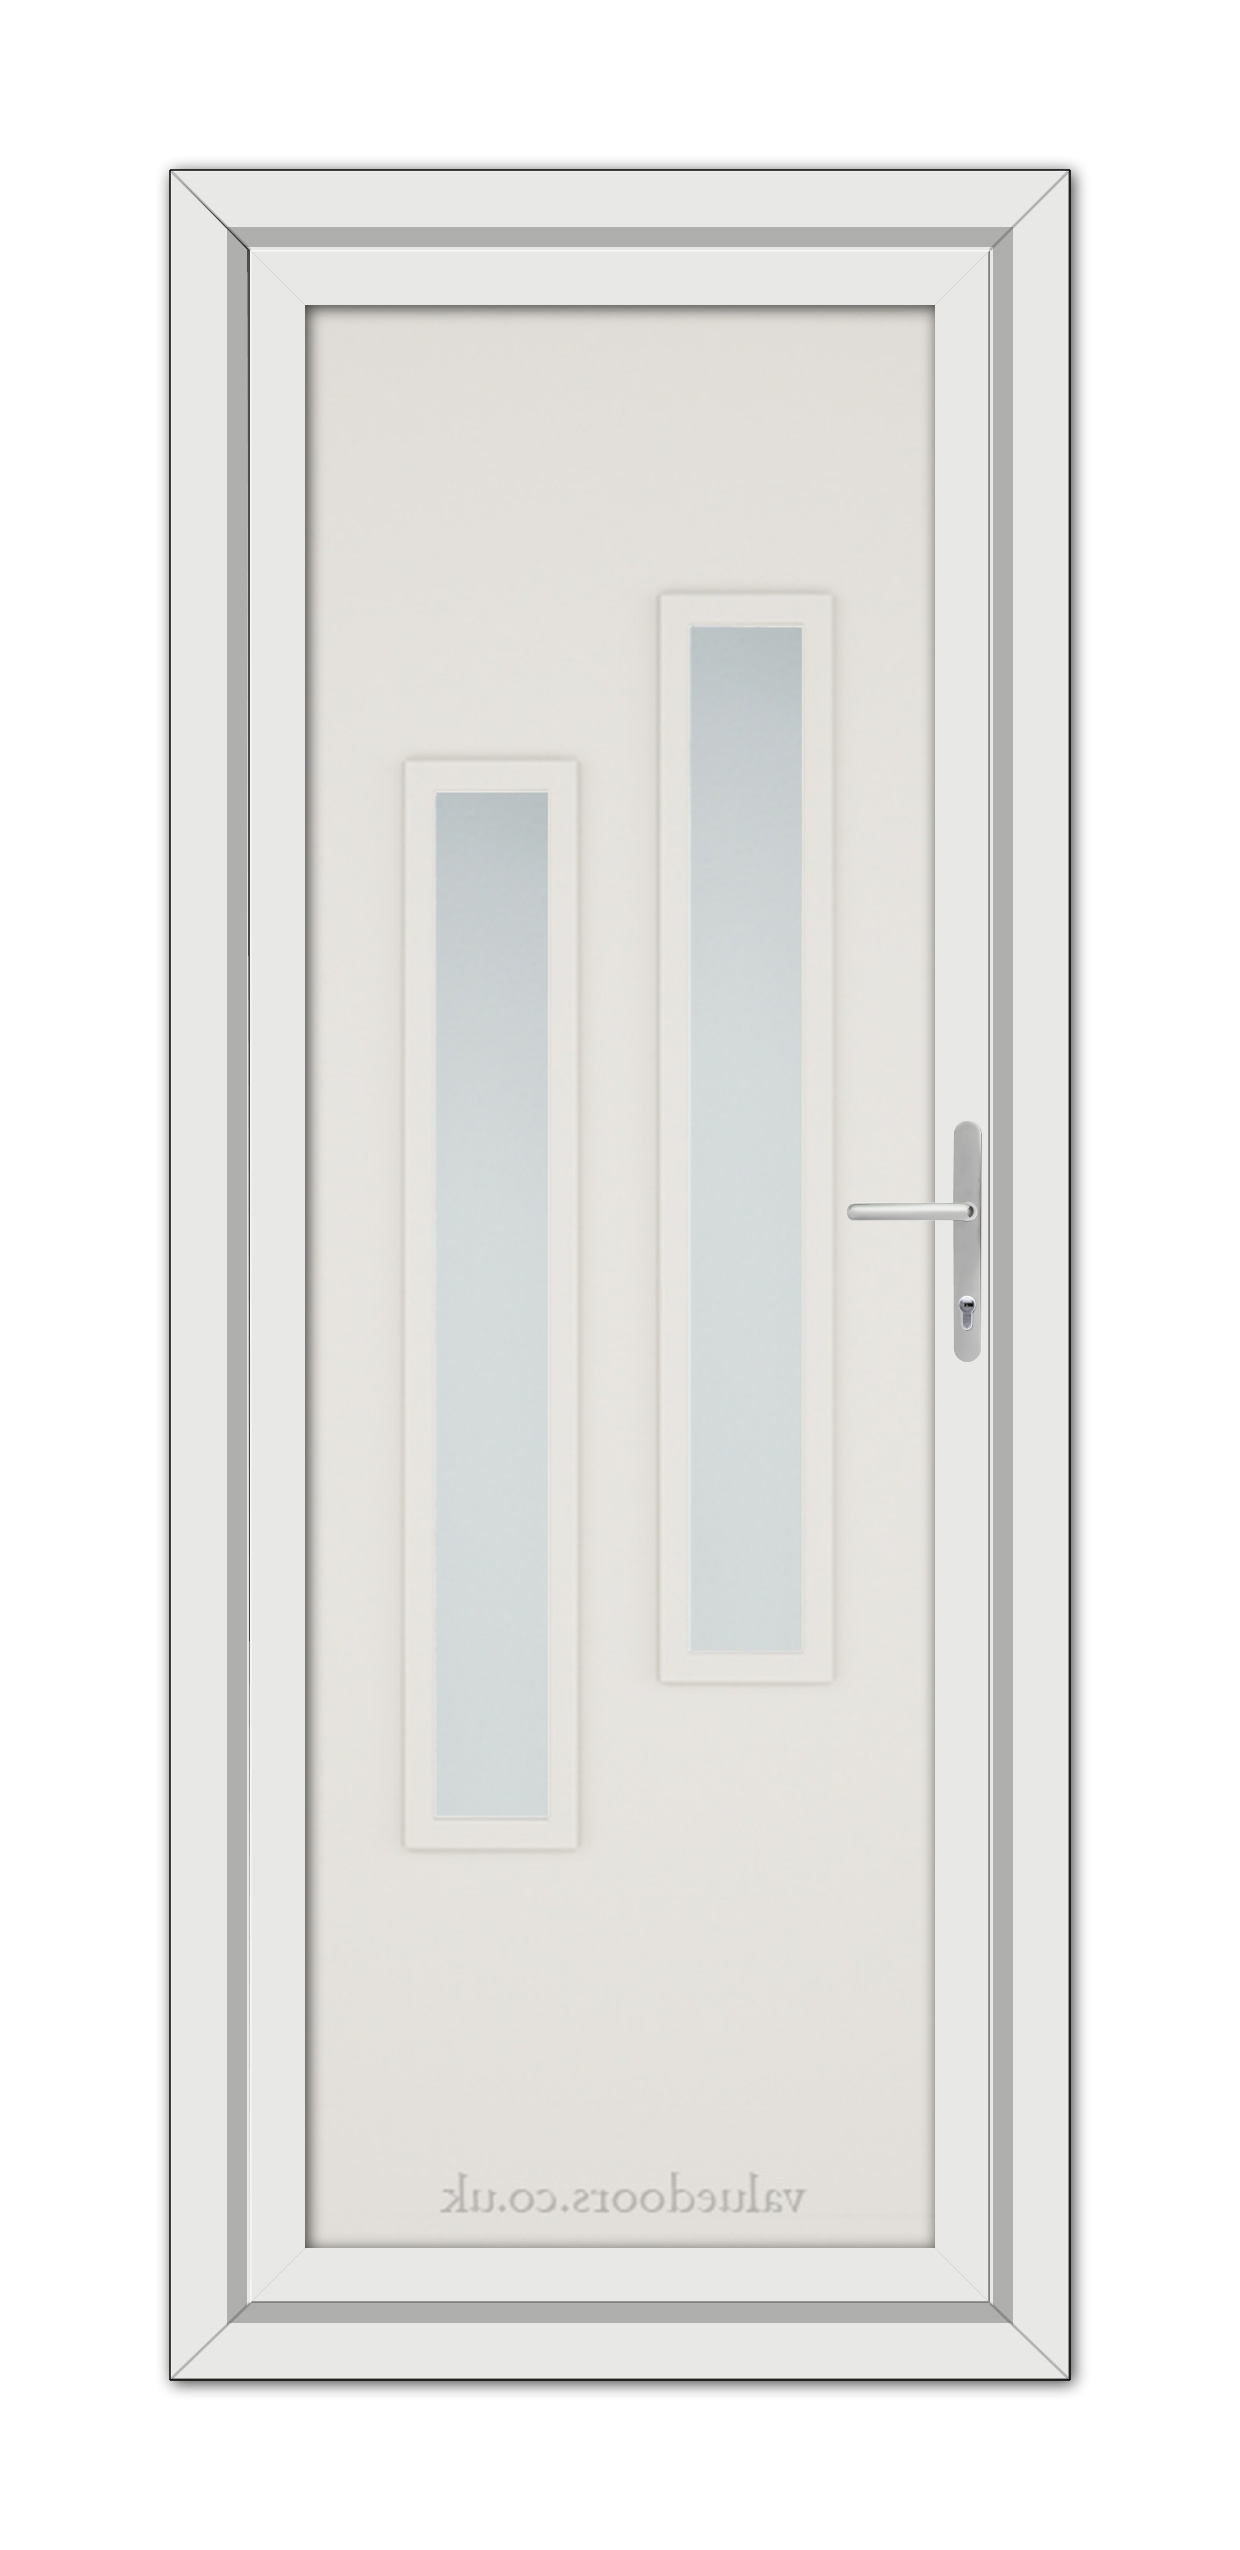 A White Cream Modern 5082 uPVC door featuring two vertical glass panels and a silver handle, set within a simple grey frame.